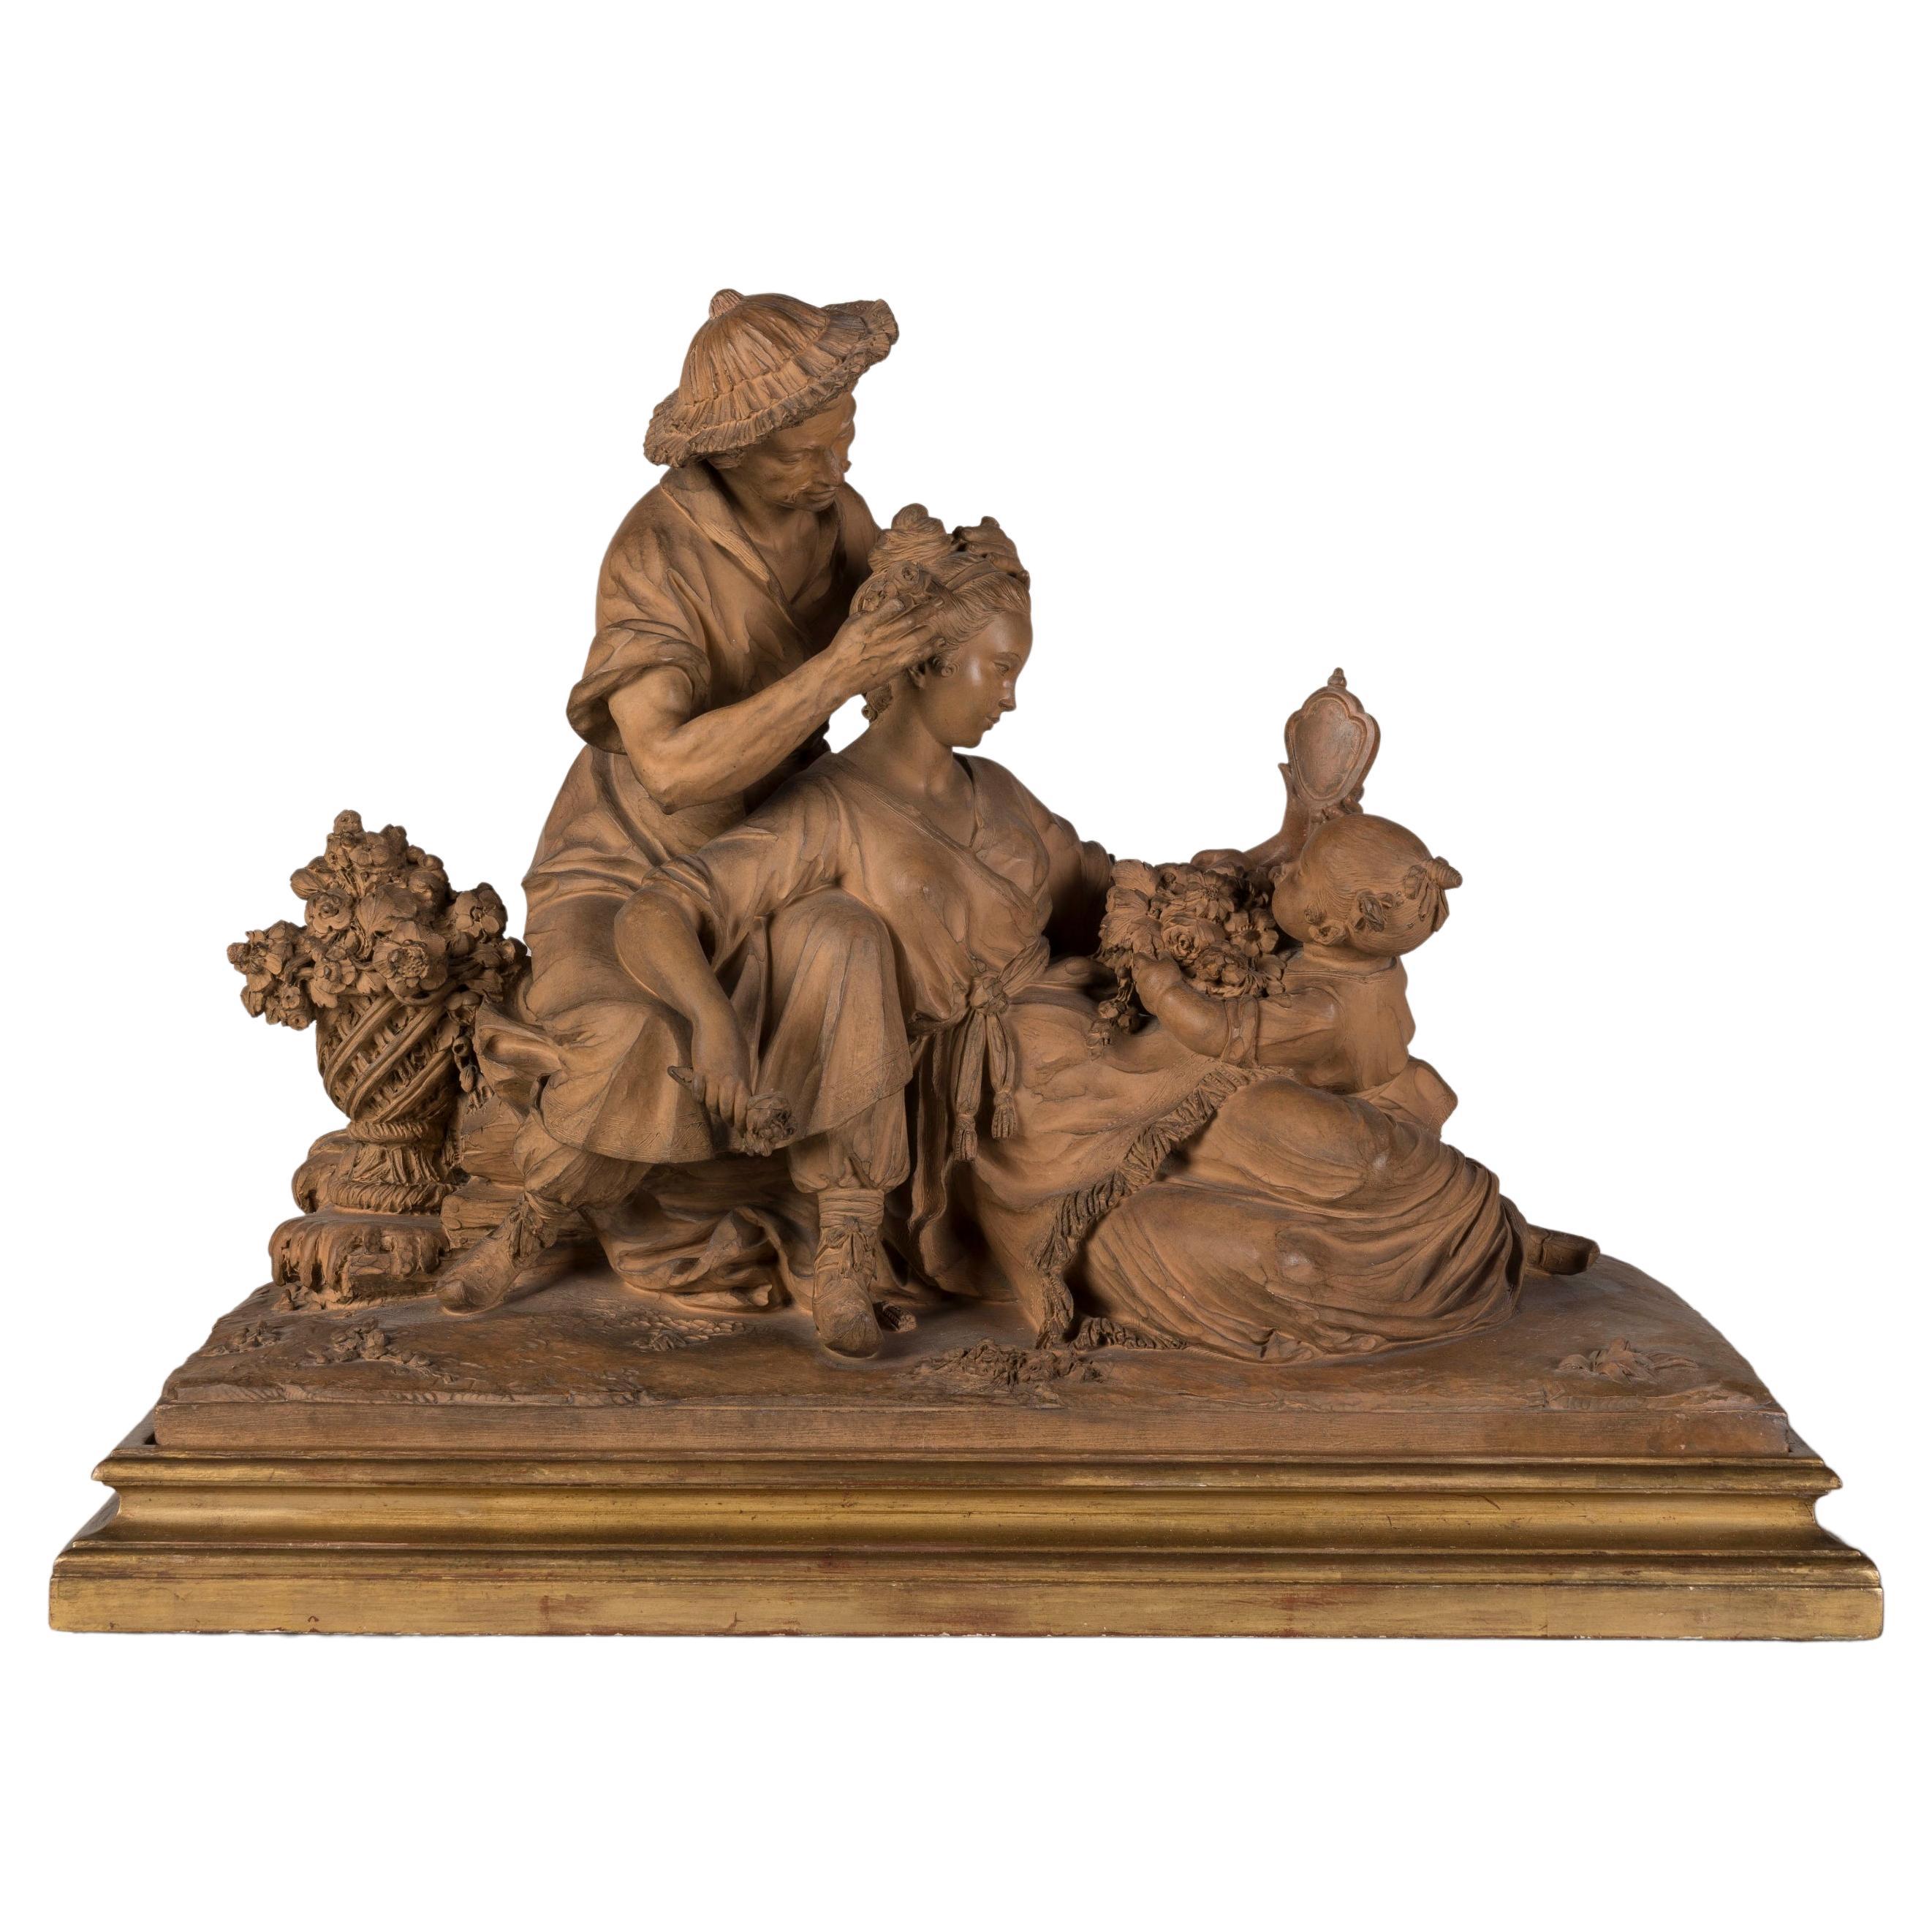 19th century Terracotta Chinoiserie Sculptural Group after François Boucher